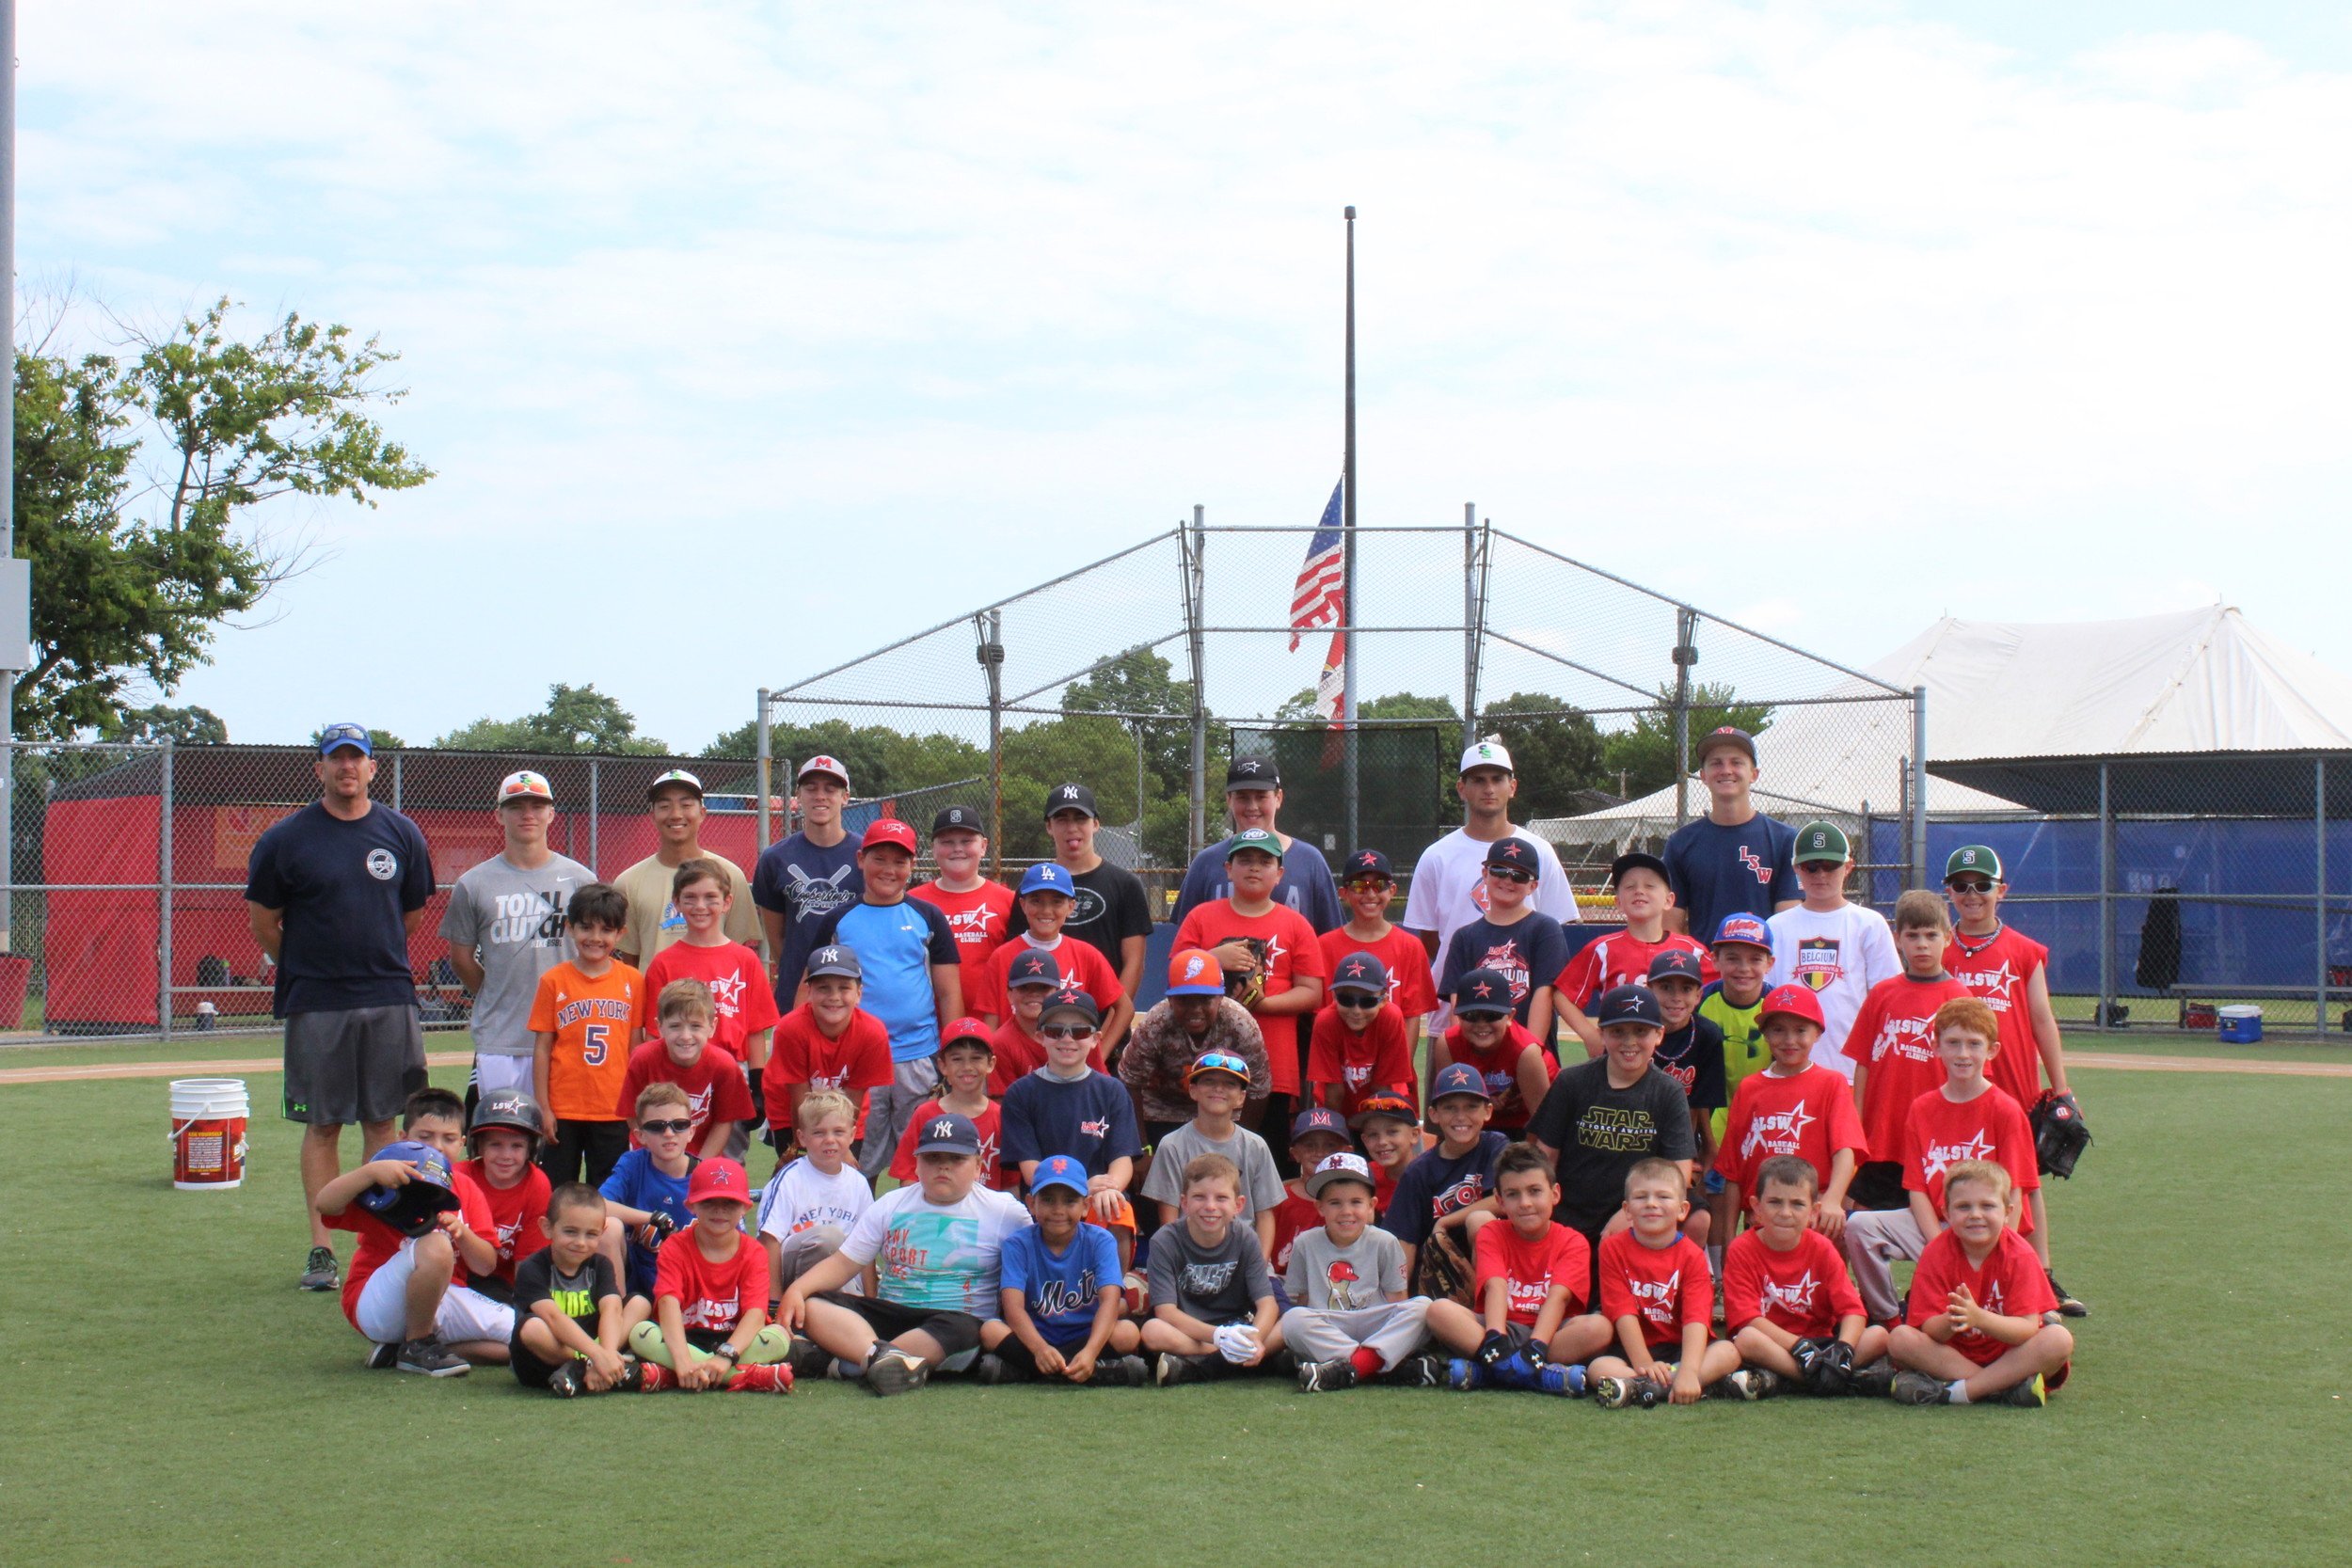 The LSW Baseball Clinic runs five days a week for three weeks in July in Seaford.